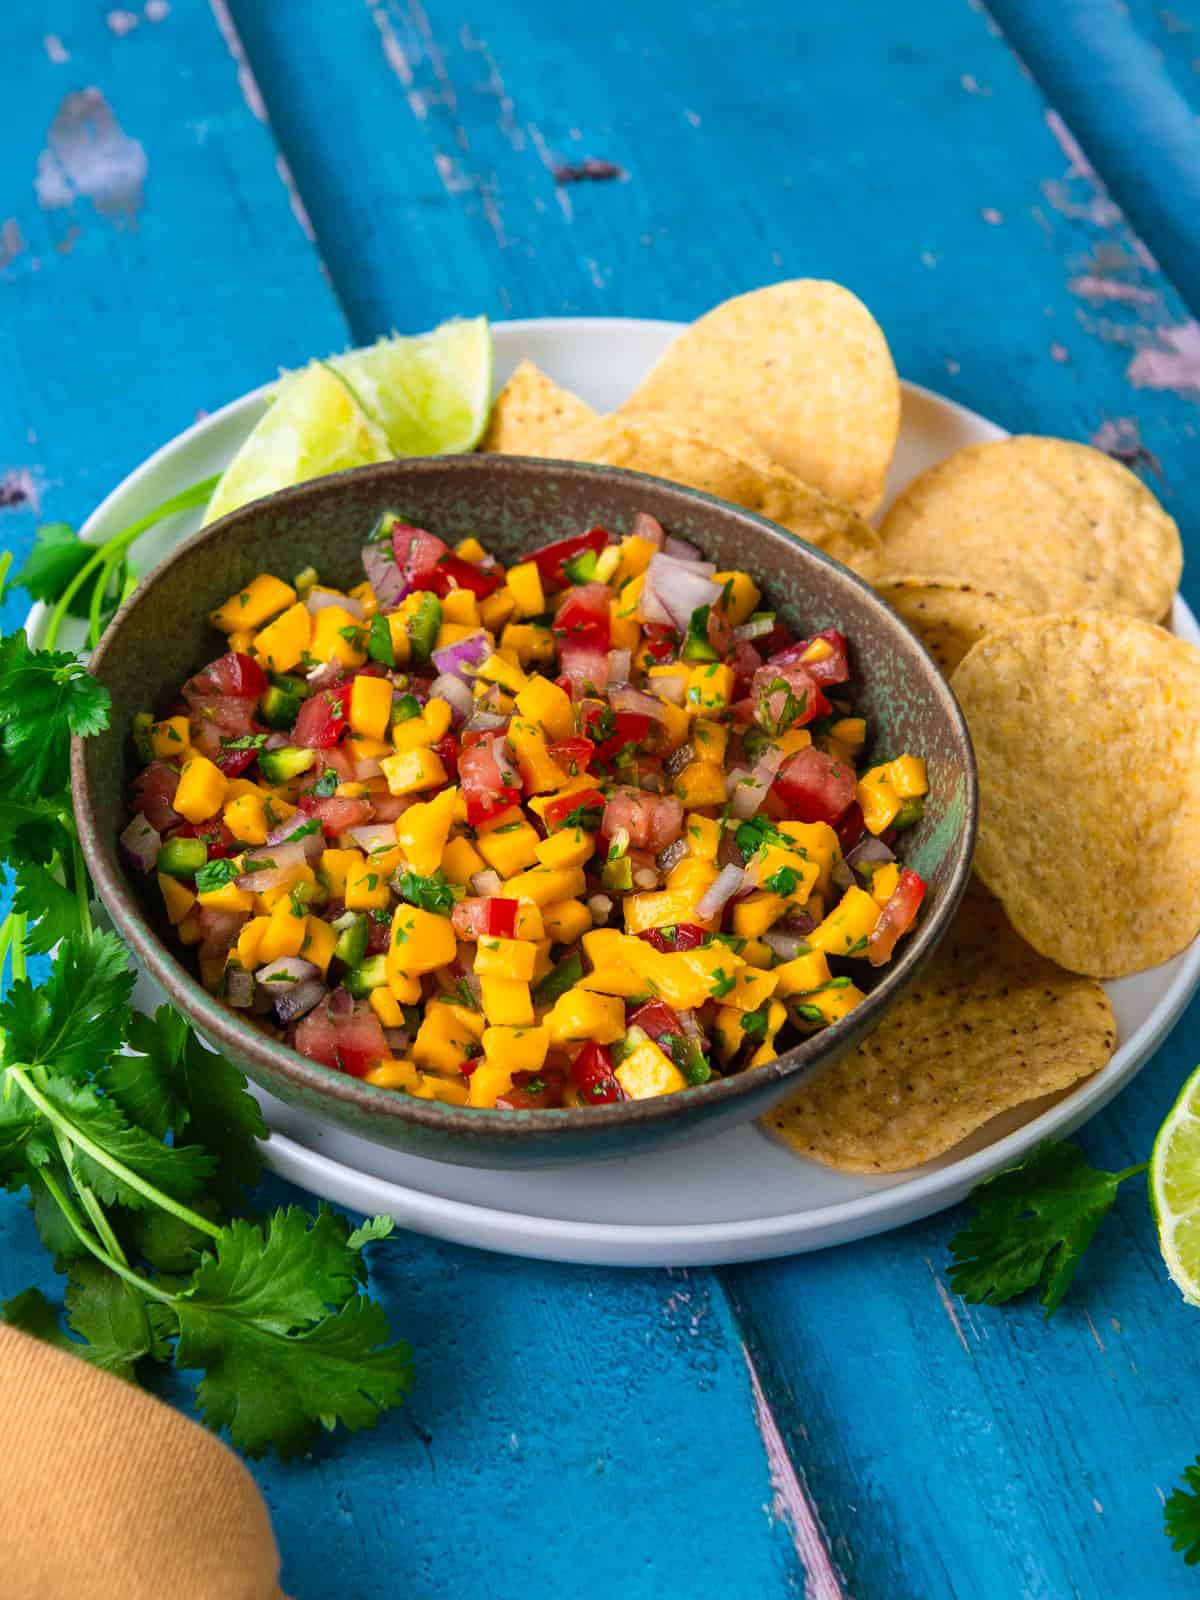 Serve mango pico de gallo with extra lime and tortilla chips.